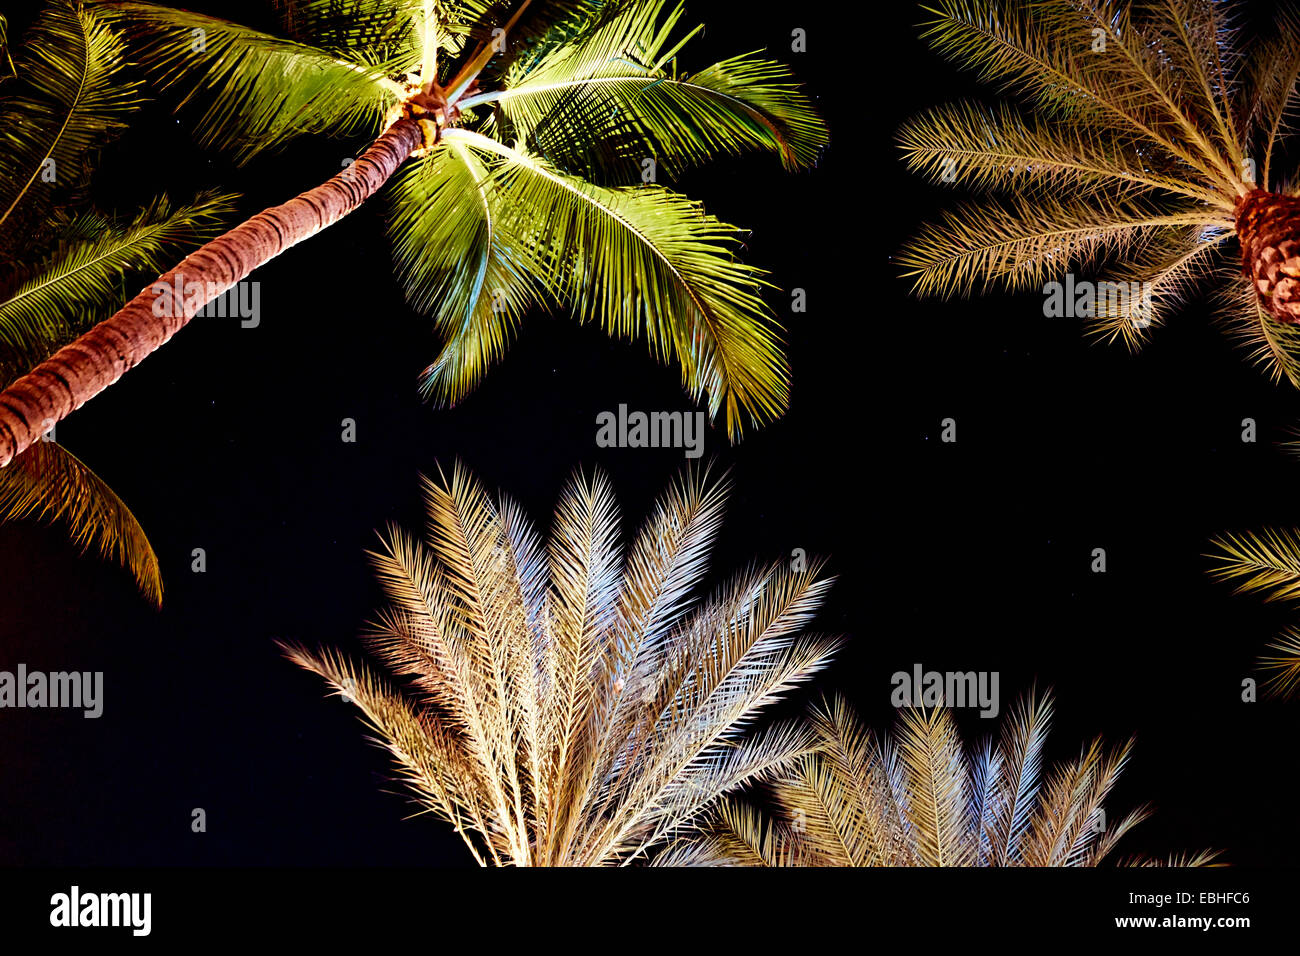 Low angle view of floodlit palm trees at night Stock Photo